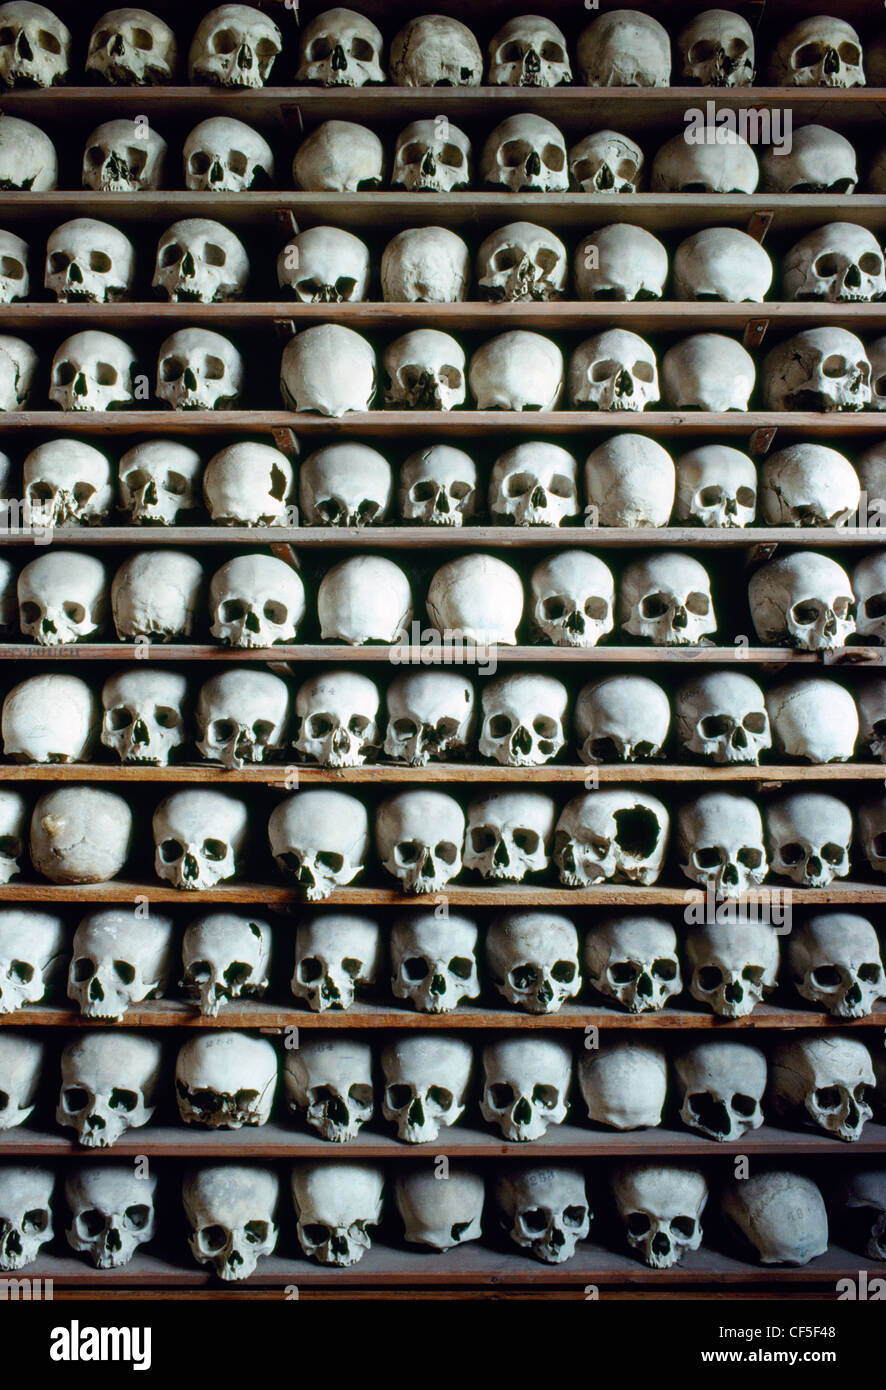 Part of the collection of some 2000 human skulls stacked in the ambulatory passage beneath the High Altar of St Leonard's church Stock Photo